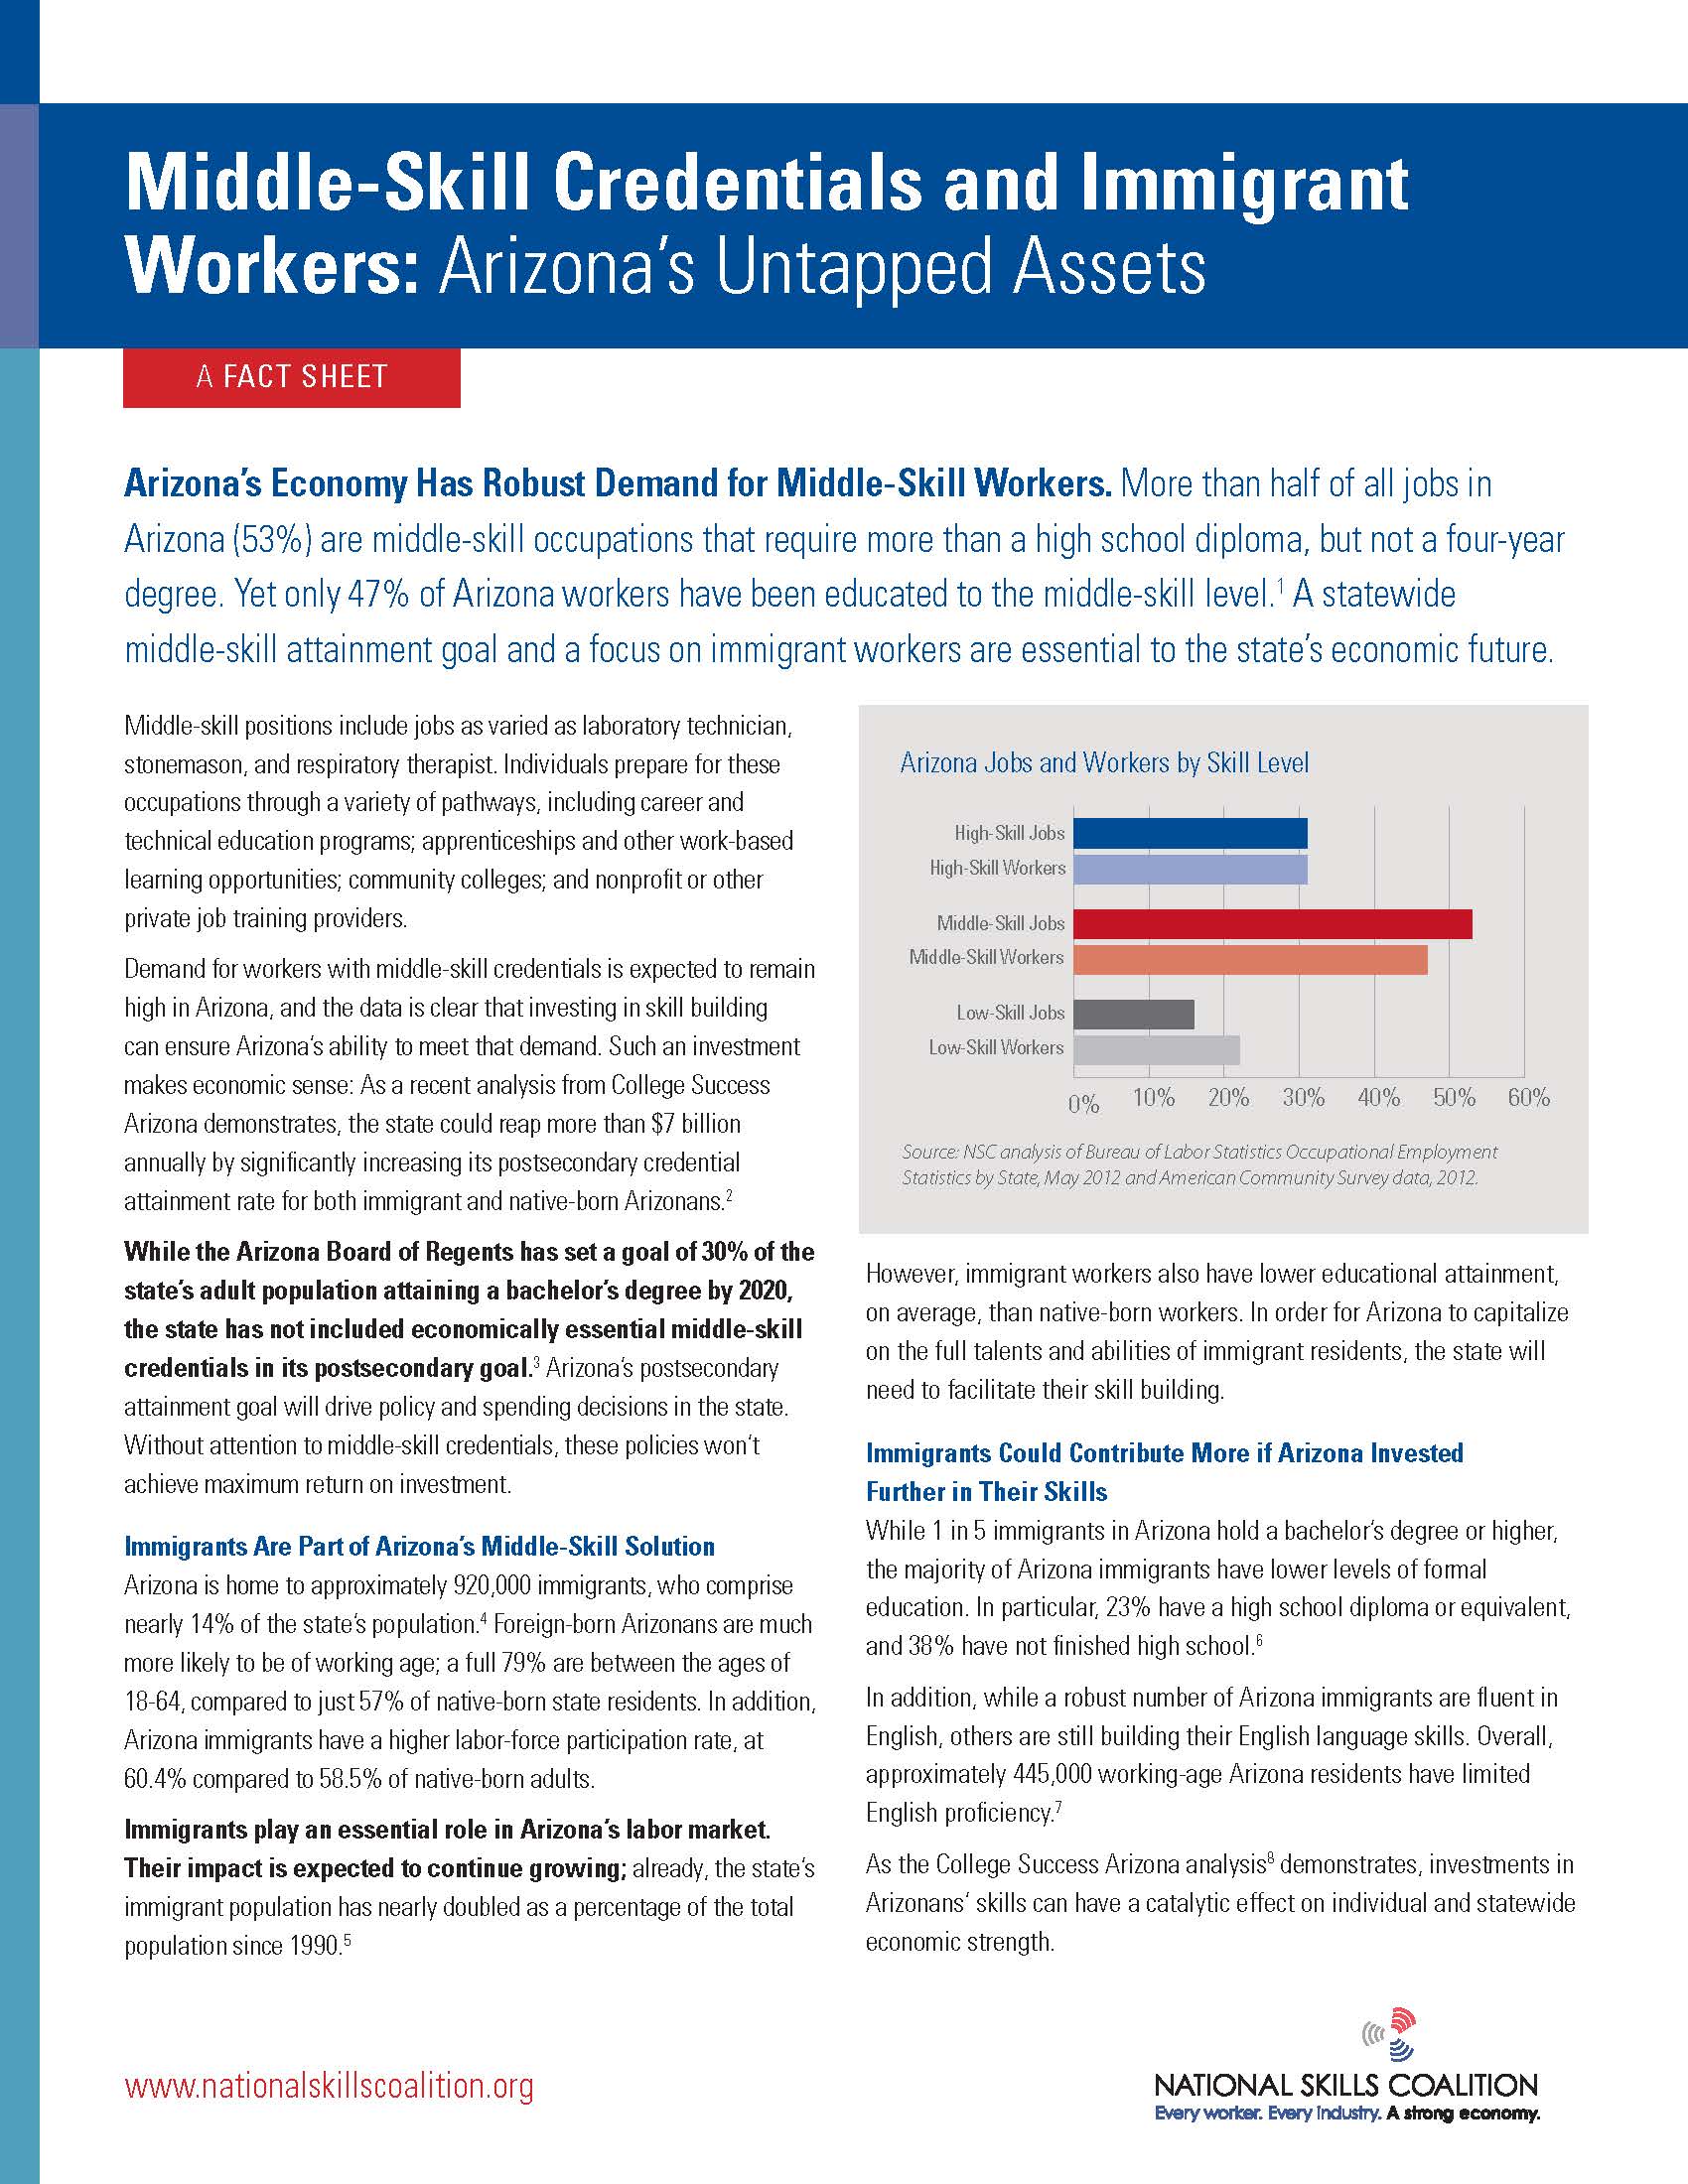 New fact sheets: Immigrants can help meet demand for middle-skill workers in Arizona, California